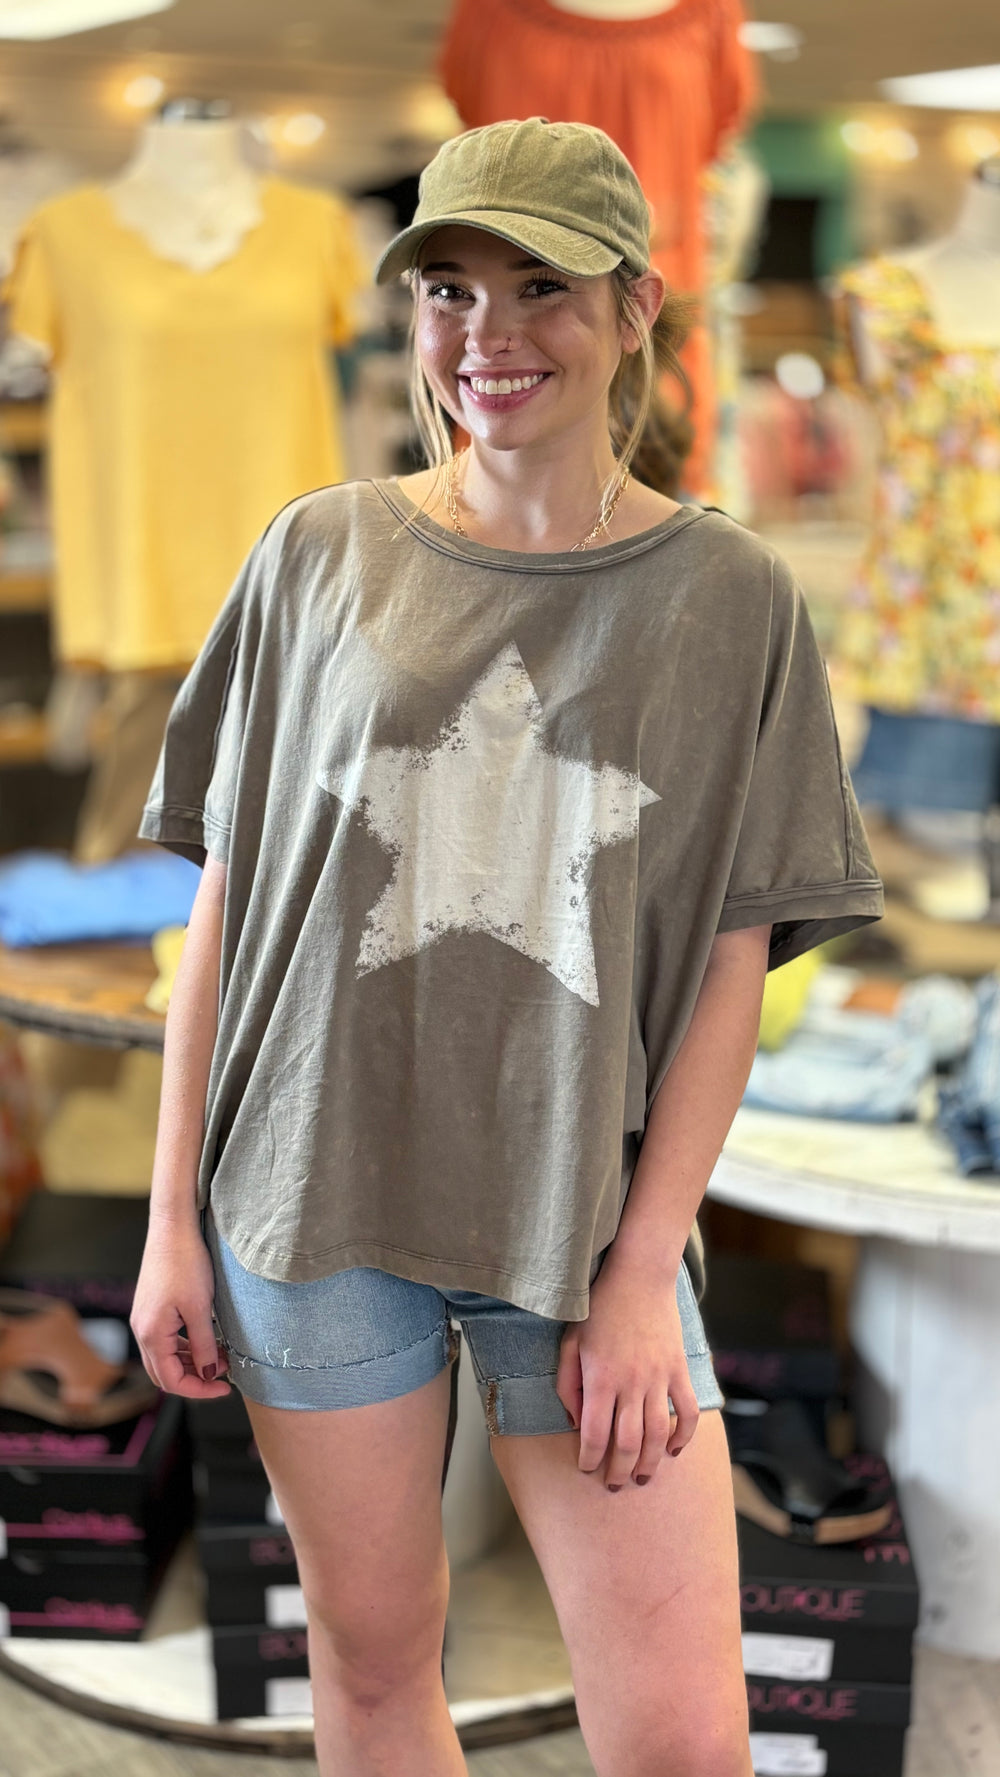 Star Mineral Washed Tee-Short Sleeves-Easel-Evergreen Boutique, Women’s Fashion Boutique in Santa Claus, Indiana